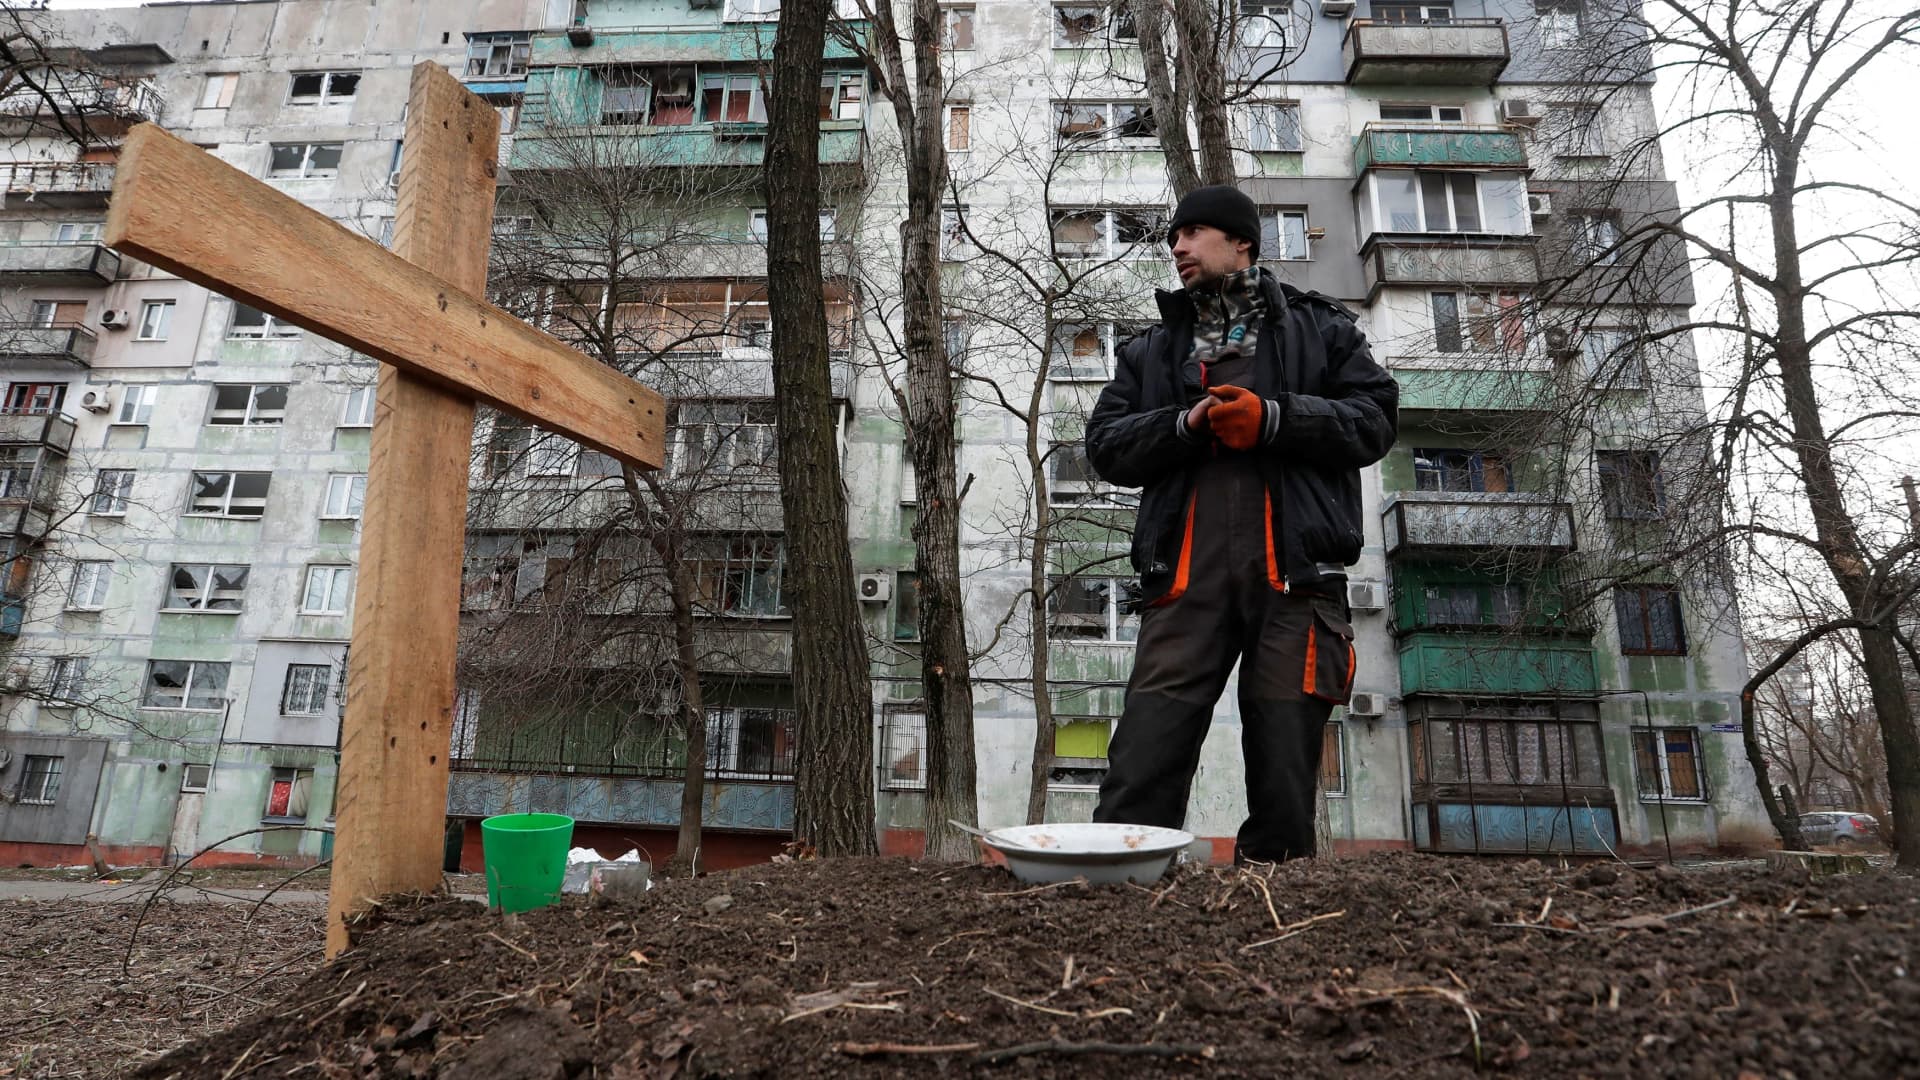 Local resident Pavel, 42, stands next to the grave of his friend Igor, who was killed by shelling while they were riding together in a car during Ukraine-Russia conflict, in a residential area in the besieged southern port city of Mariupol, Ukraine March 30, 2022.